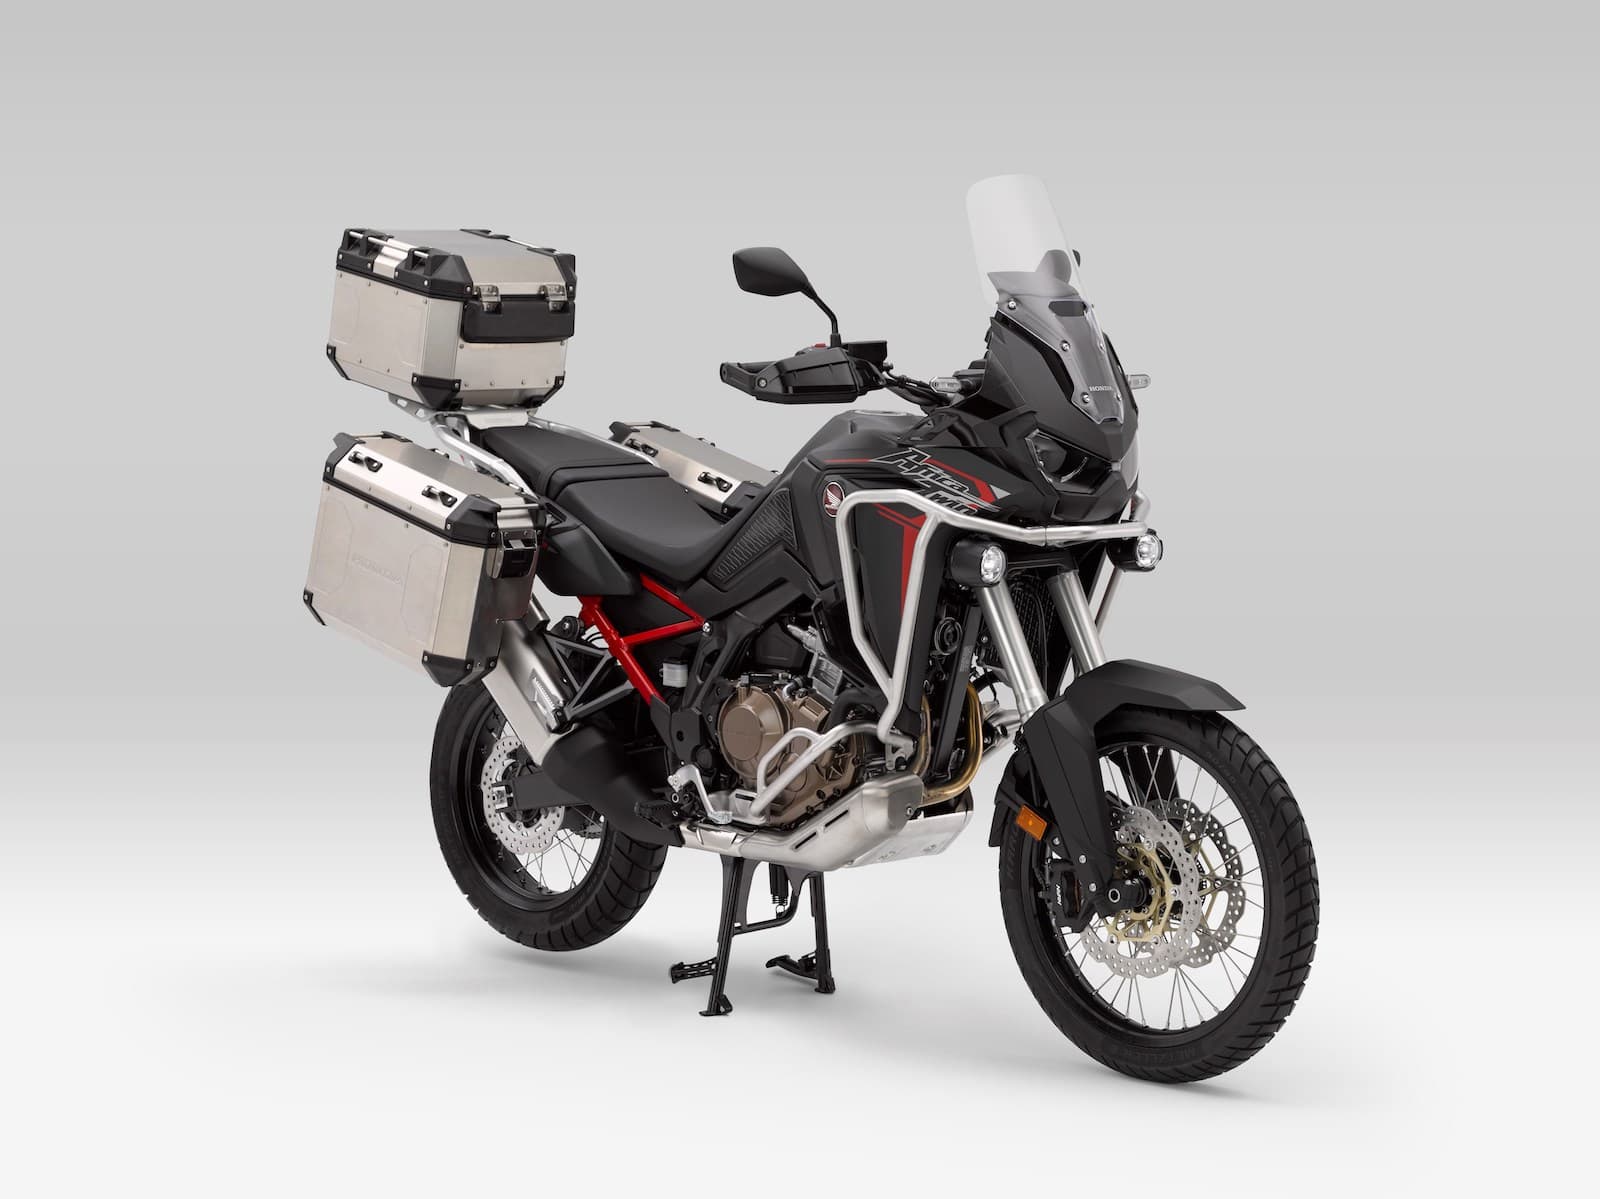 Honda Africa Twin CRF1100L black with full luggage and bars